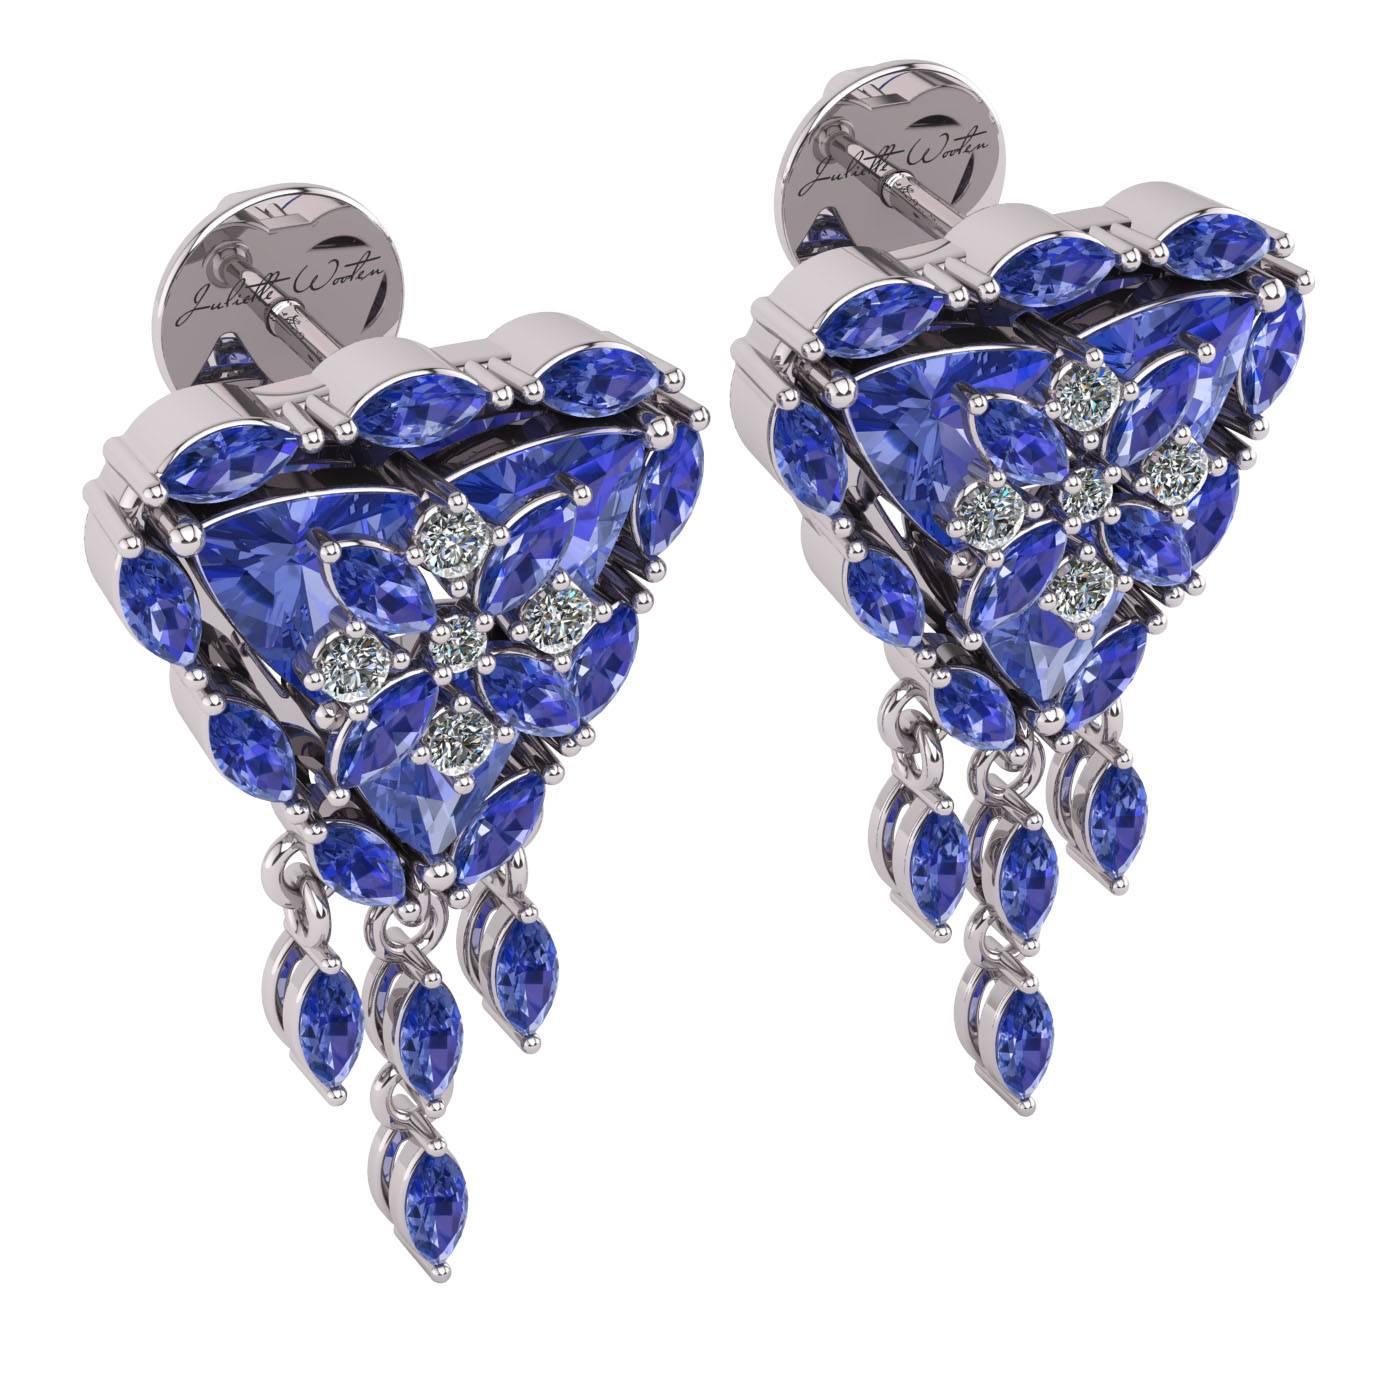 LA BEAUTÉ TANZANITE EARRINGS

Tanzanite’s gorgeous color is a captivating mix of blue and purple. It is symbolizing life, power and balance. Discover the natural beauty of this mysterious gemstone with our chic and luxurious LA BEAUTÉ collection.